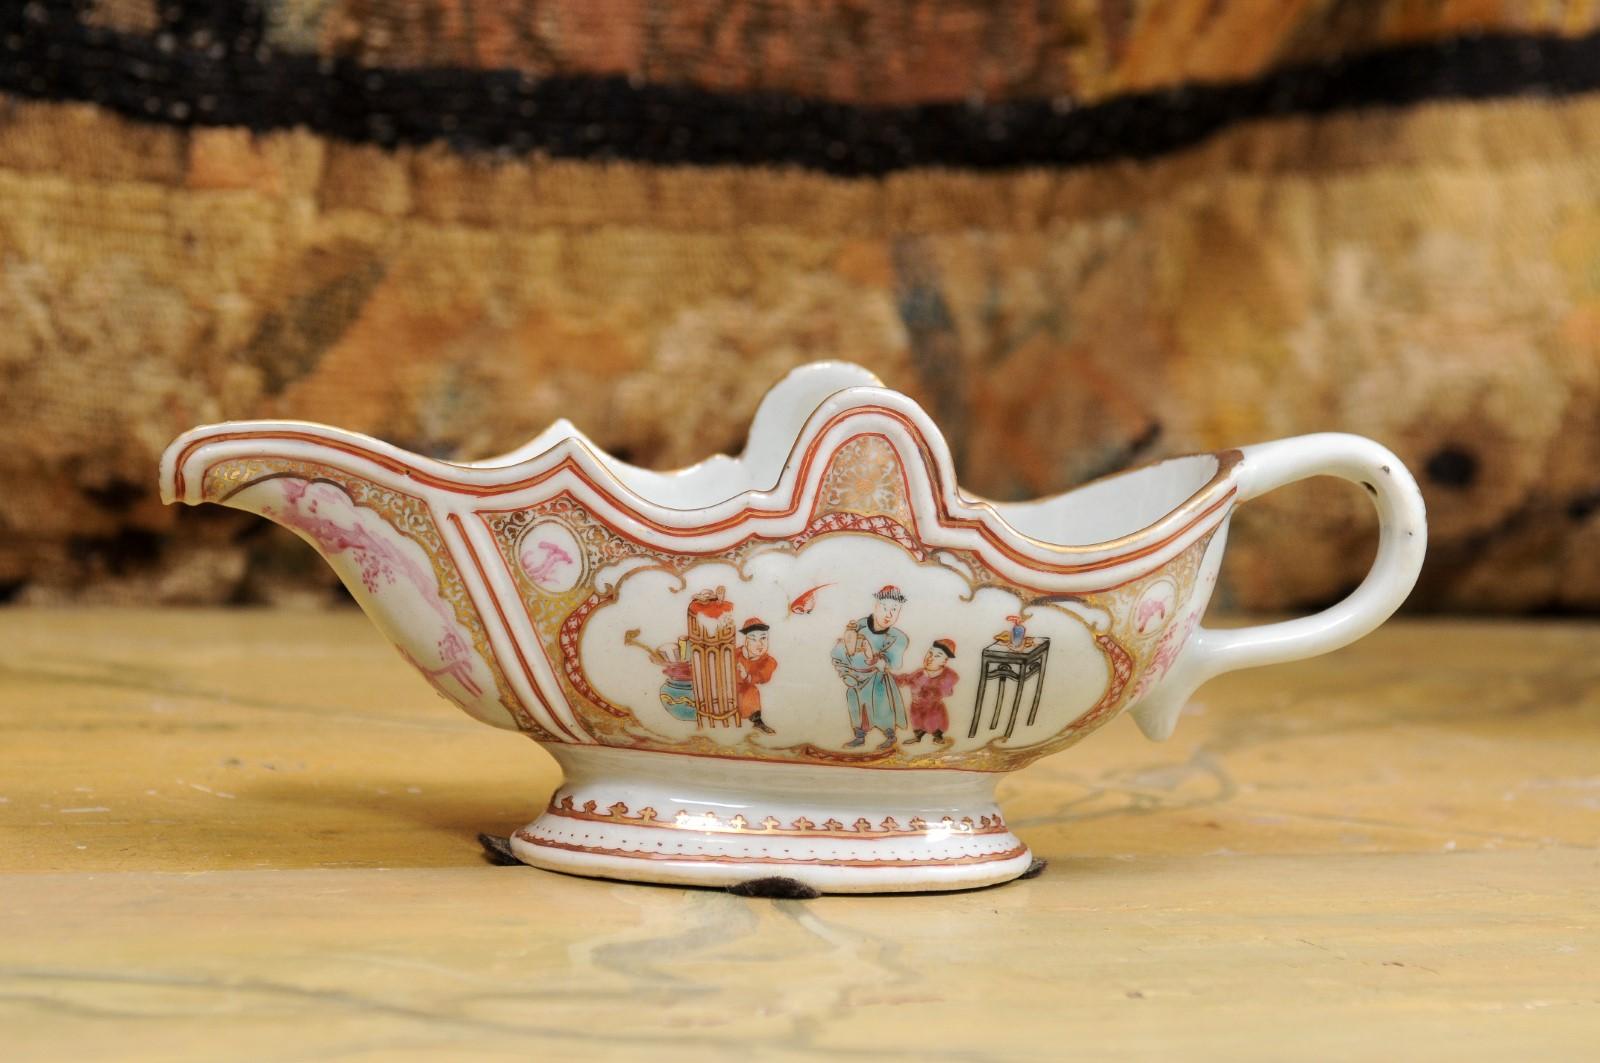  Late 18th Century Chinese Export Porcelain Sauce Boat For Sale 3